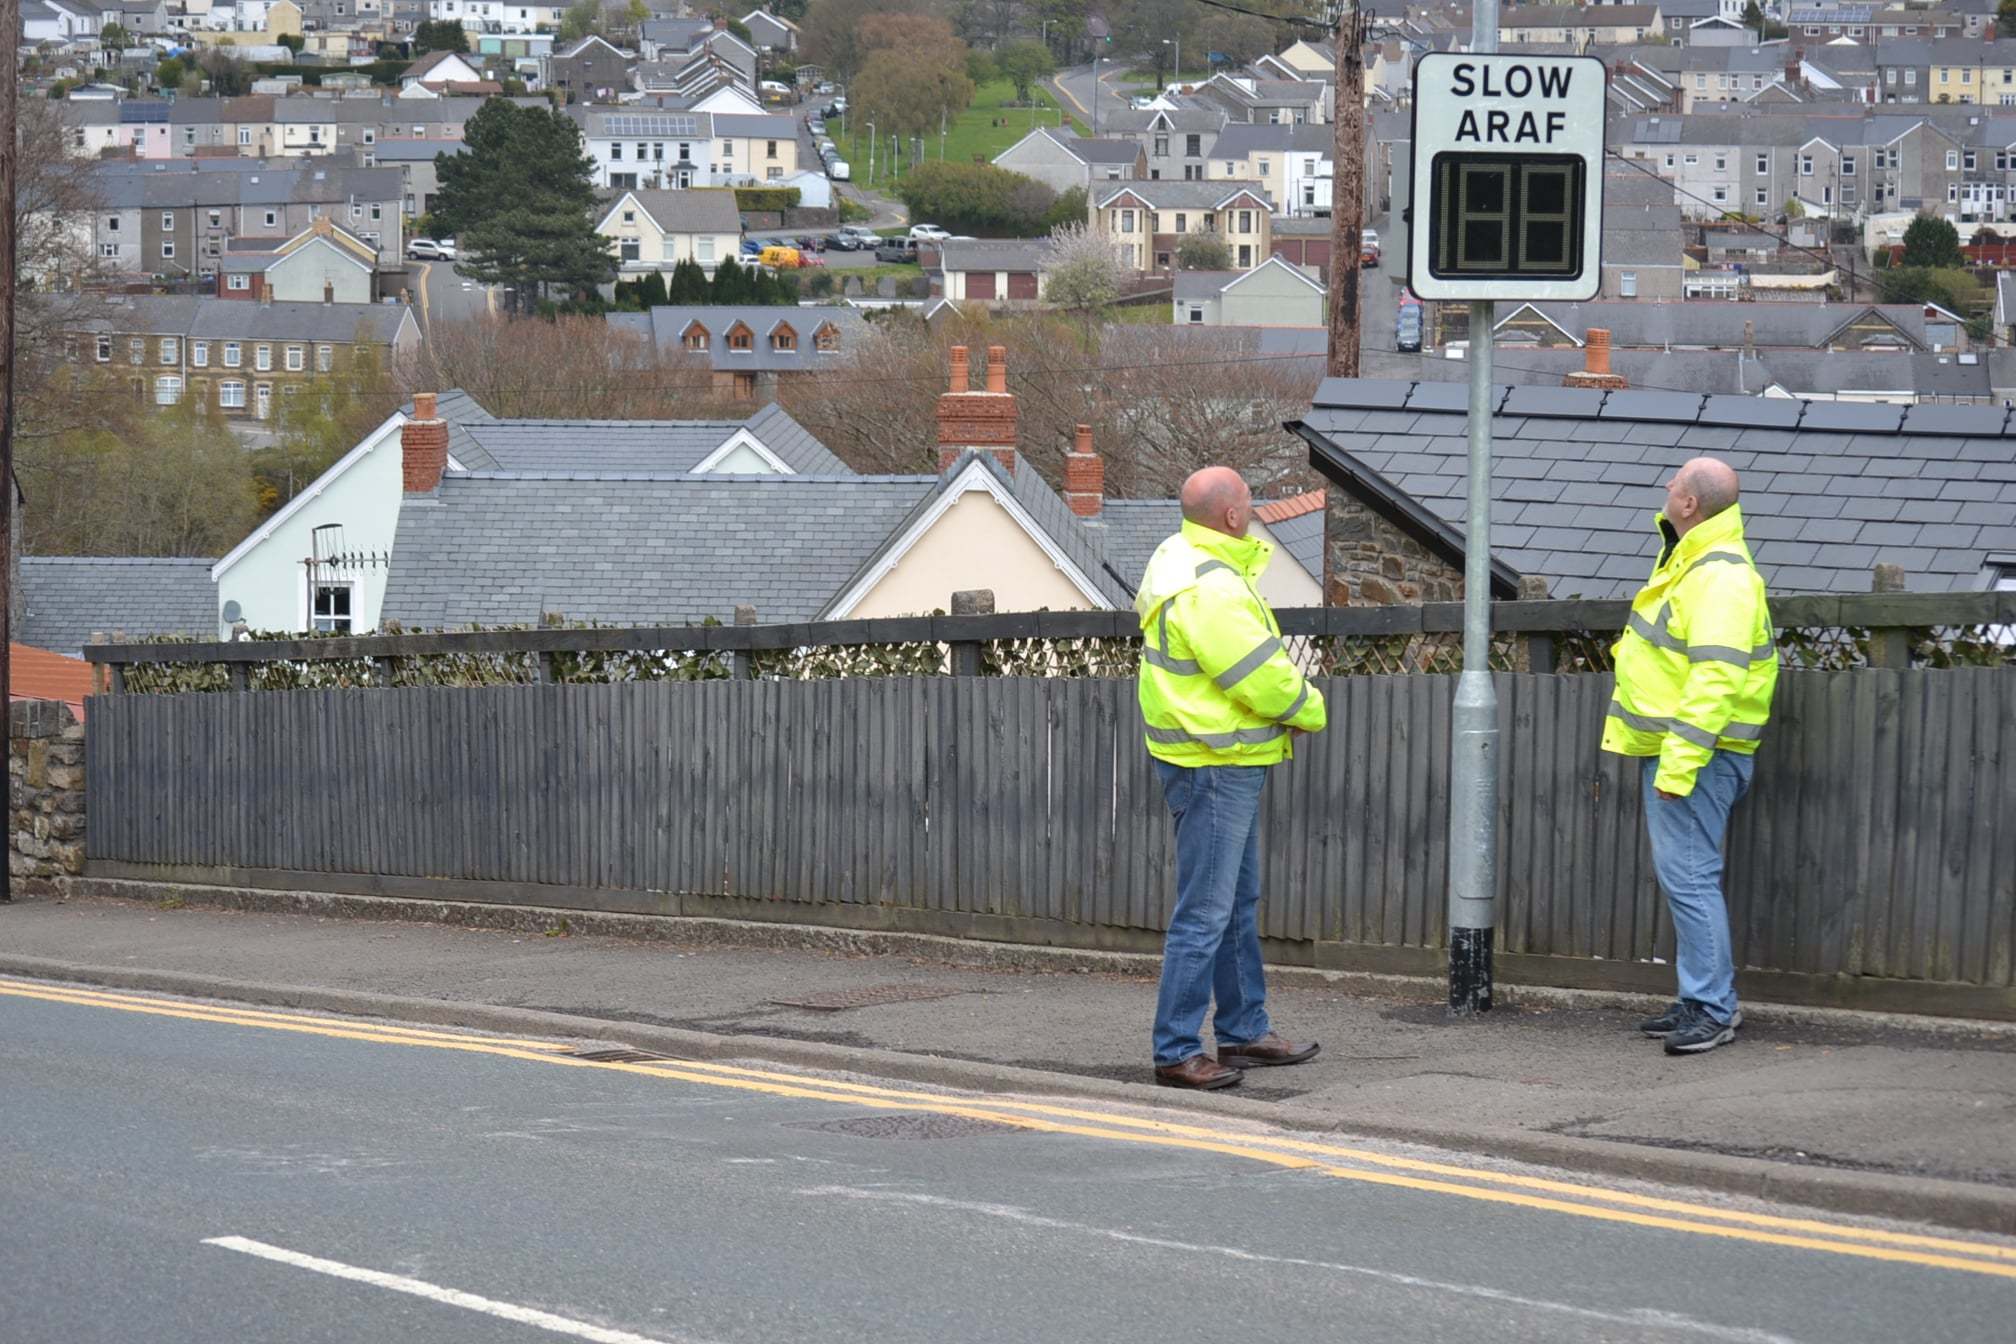 The newly installed Speed Indicator Device on Varteg Road heading into Blaenavon. Picture: Blaenavon Town Council.